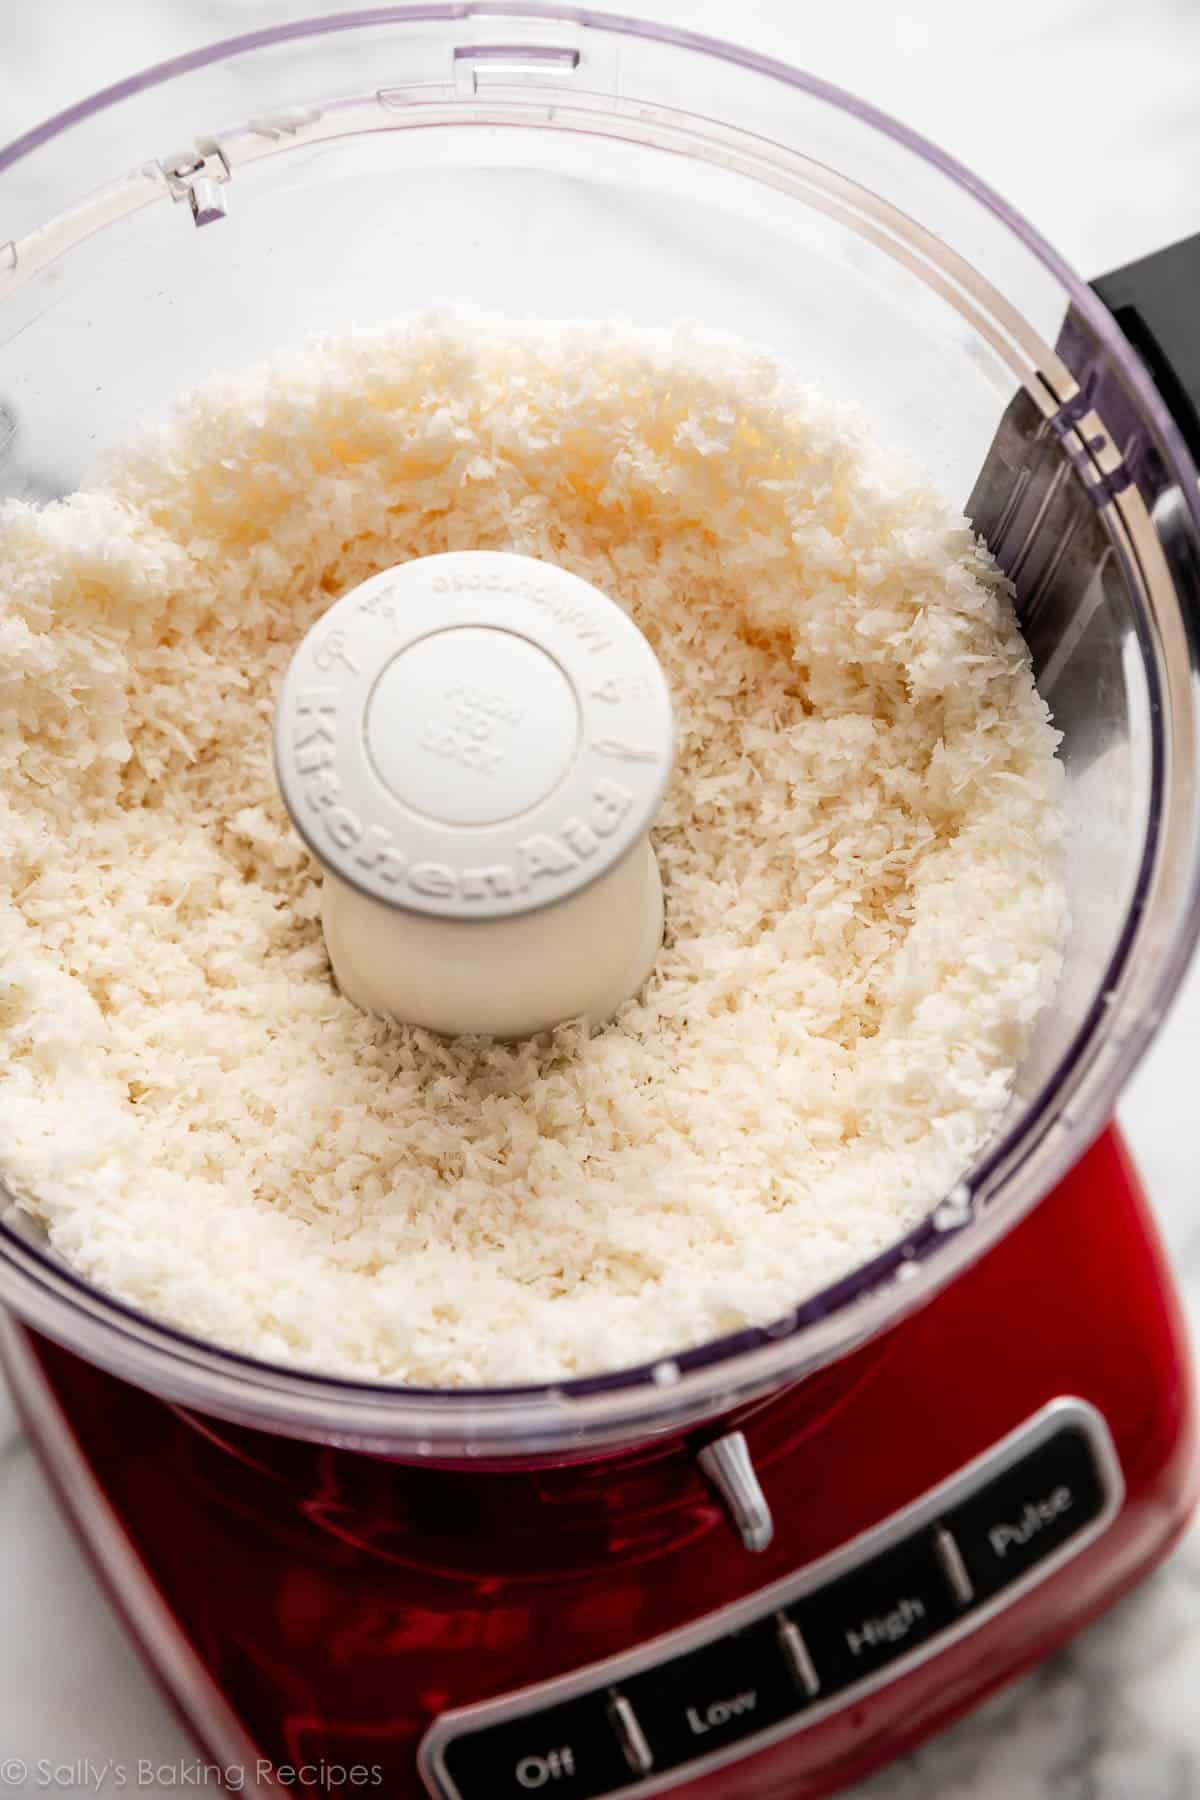 pulsed coconut in red food processor bowl.